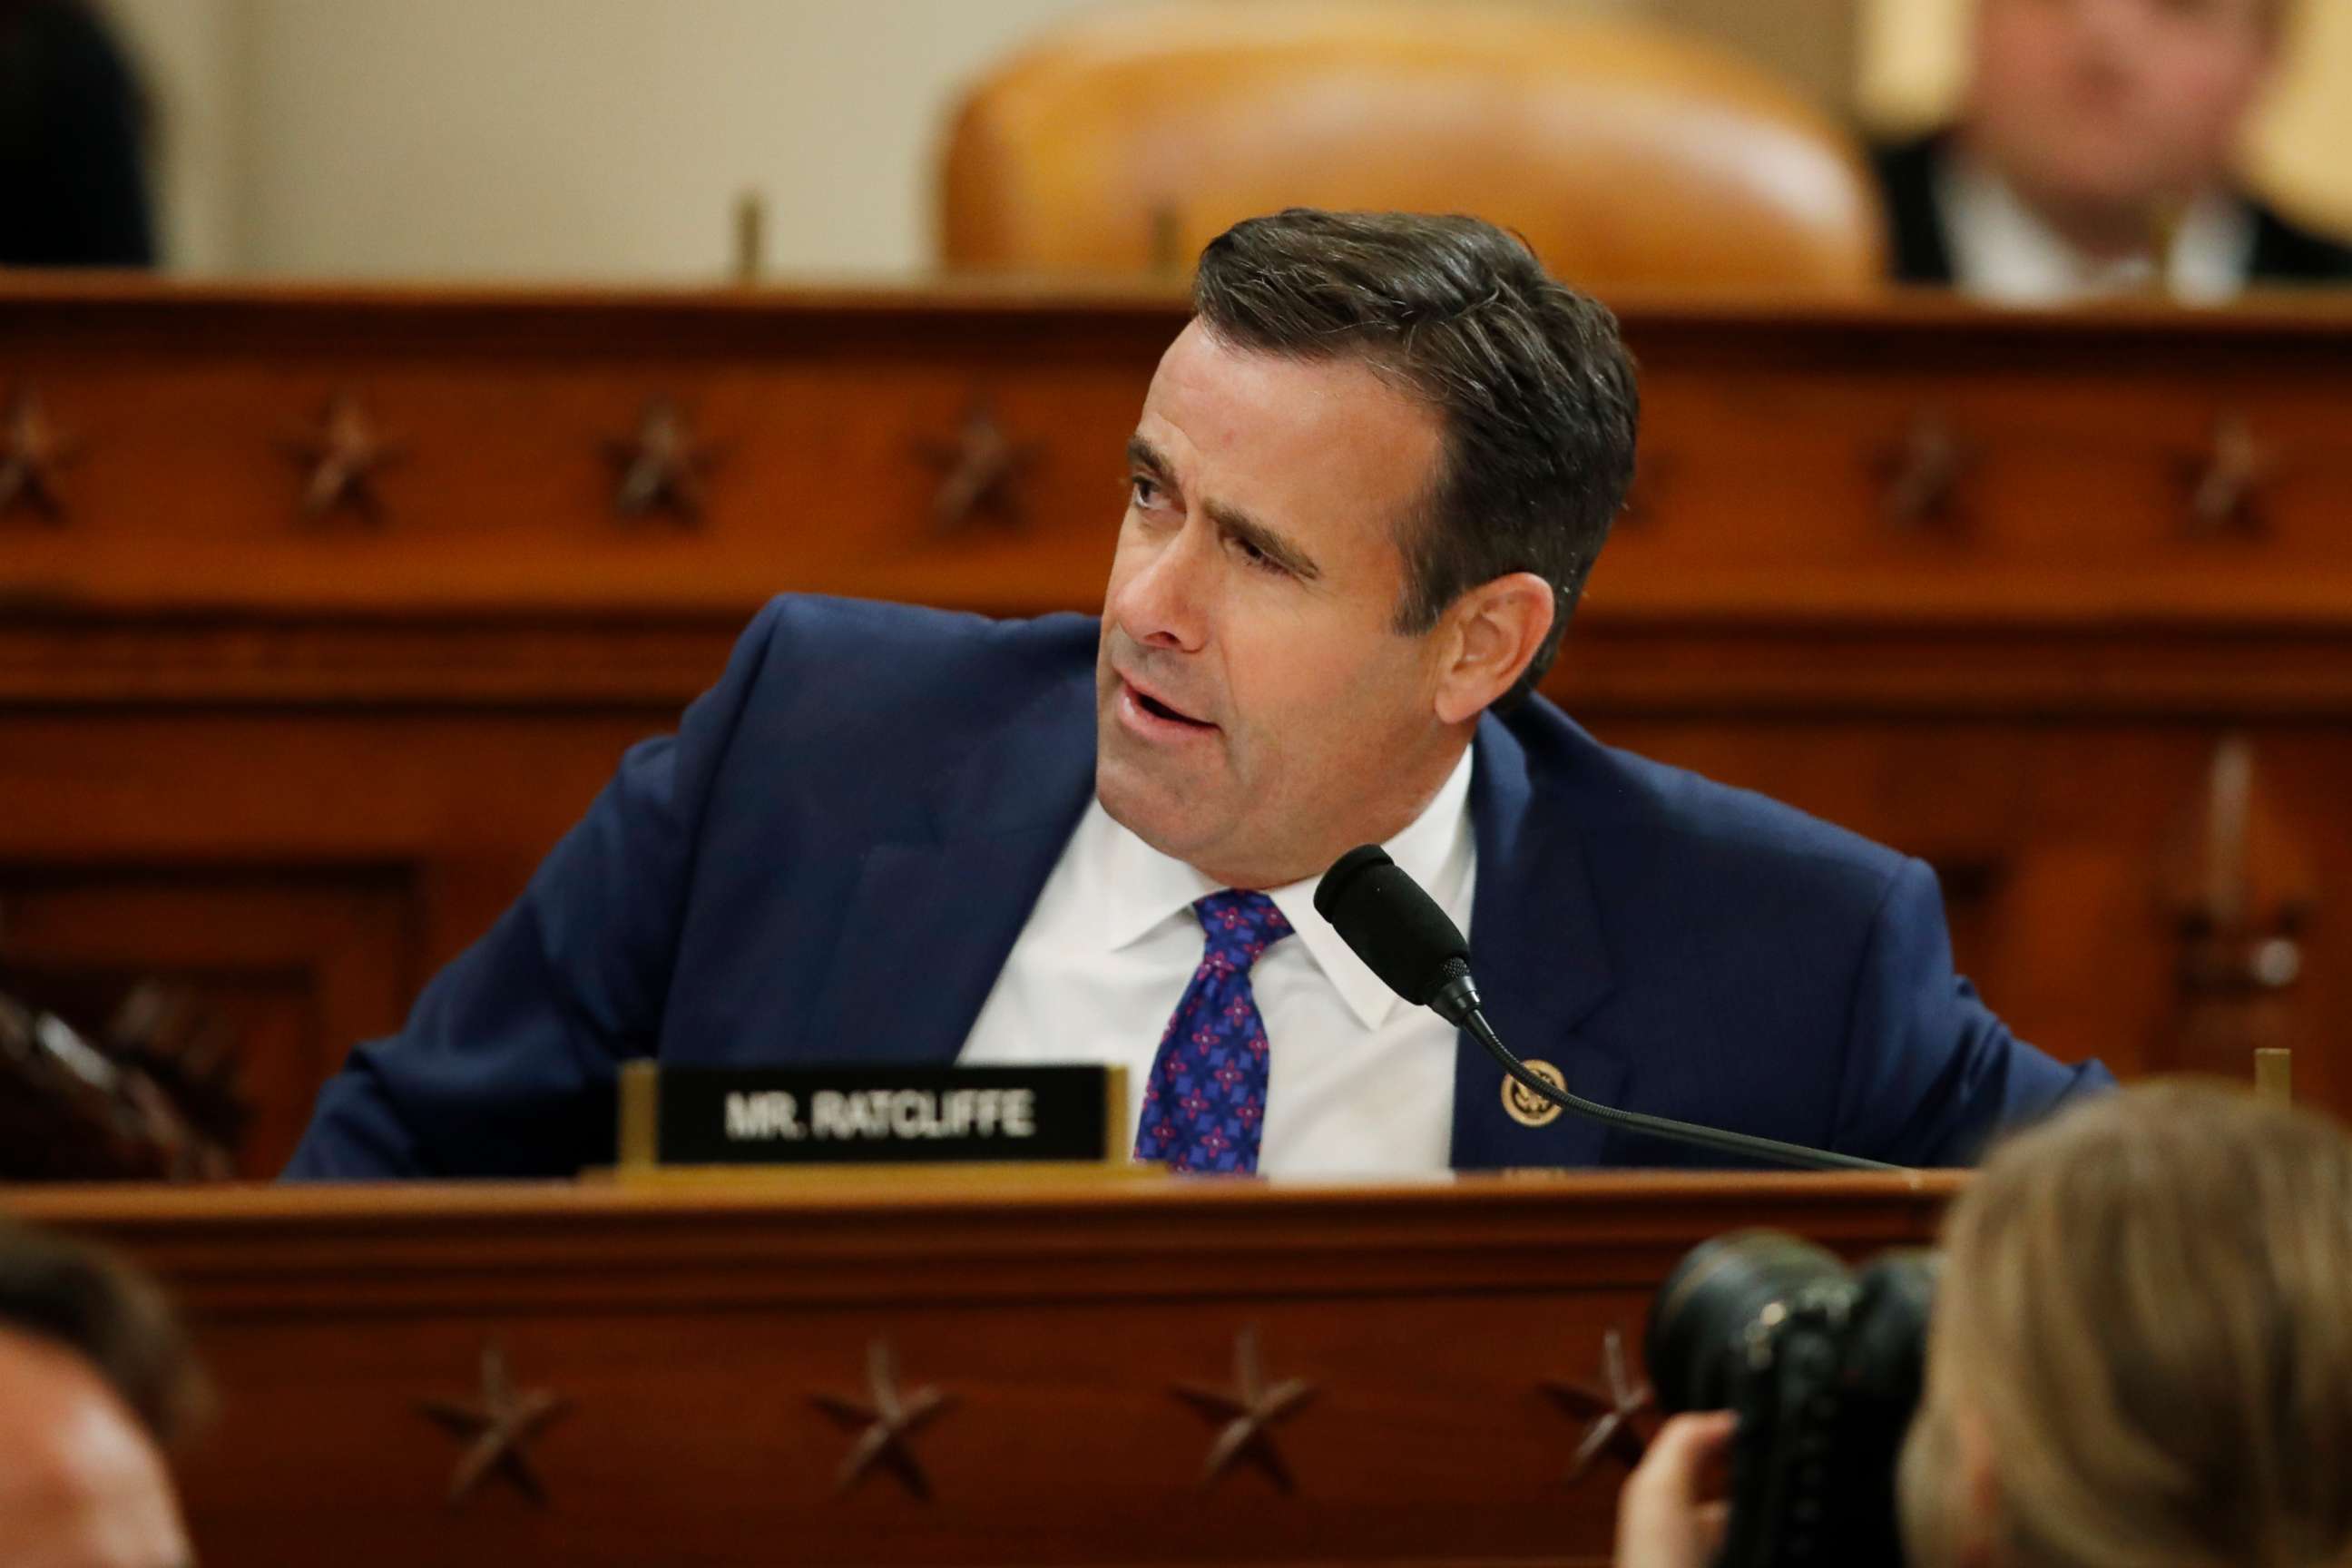 PHOTO: Rep. John Ratcliffe speaks during a hearing with top U.S. diplomat in Ukraine William Taylor, and career Foreign Service officer George Kent, before the House Intelligence Committee on Capitol Hill in Washington, Nov. 13, 2019.